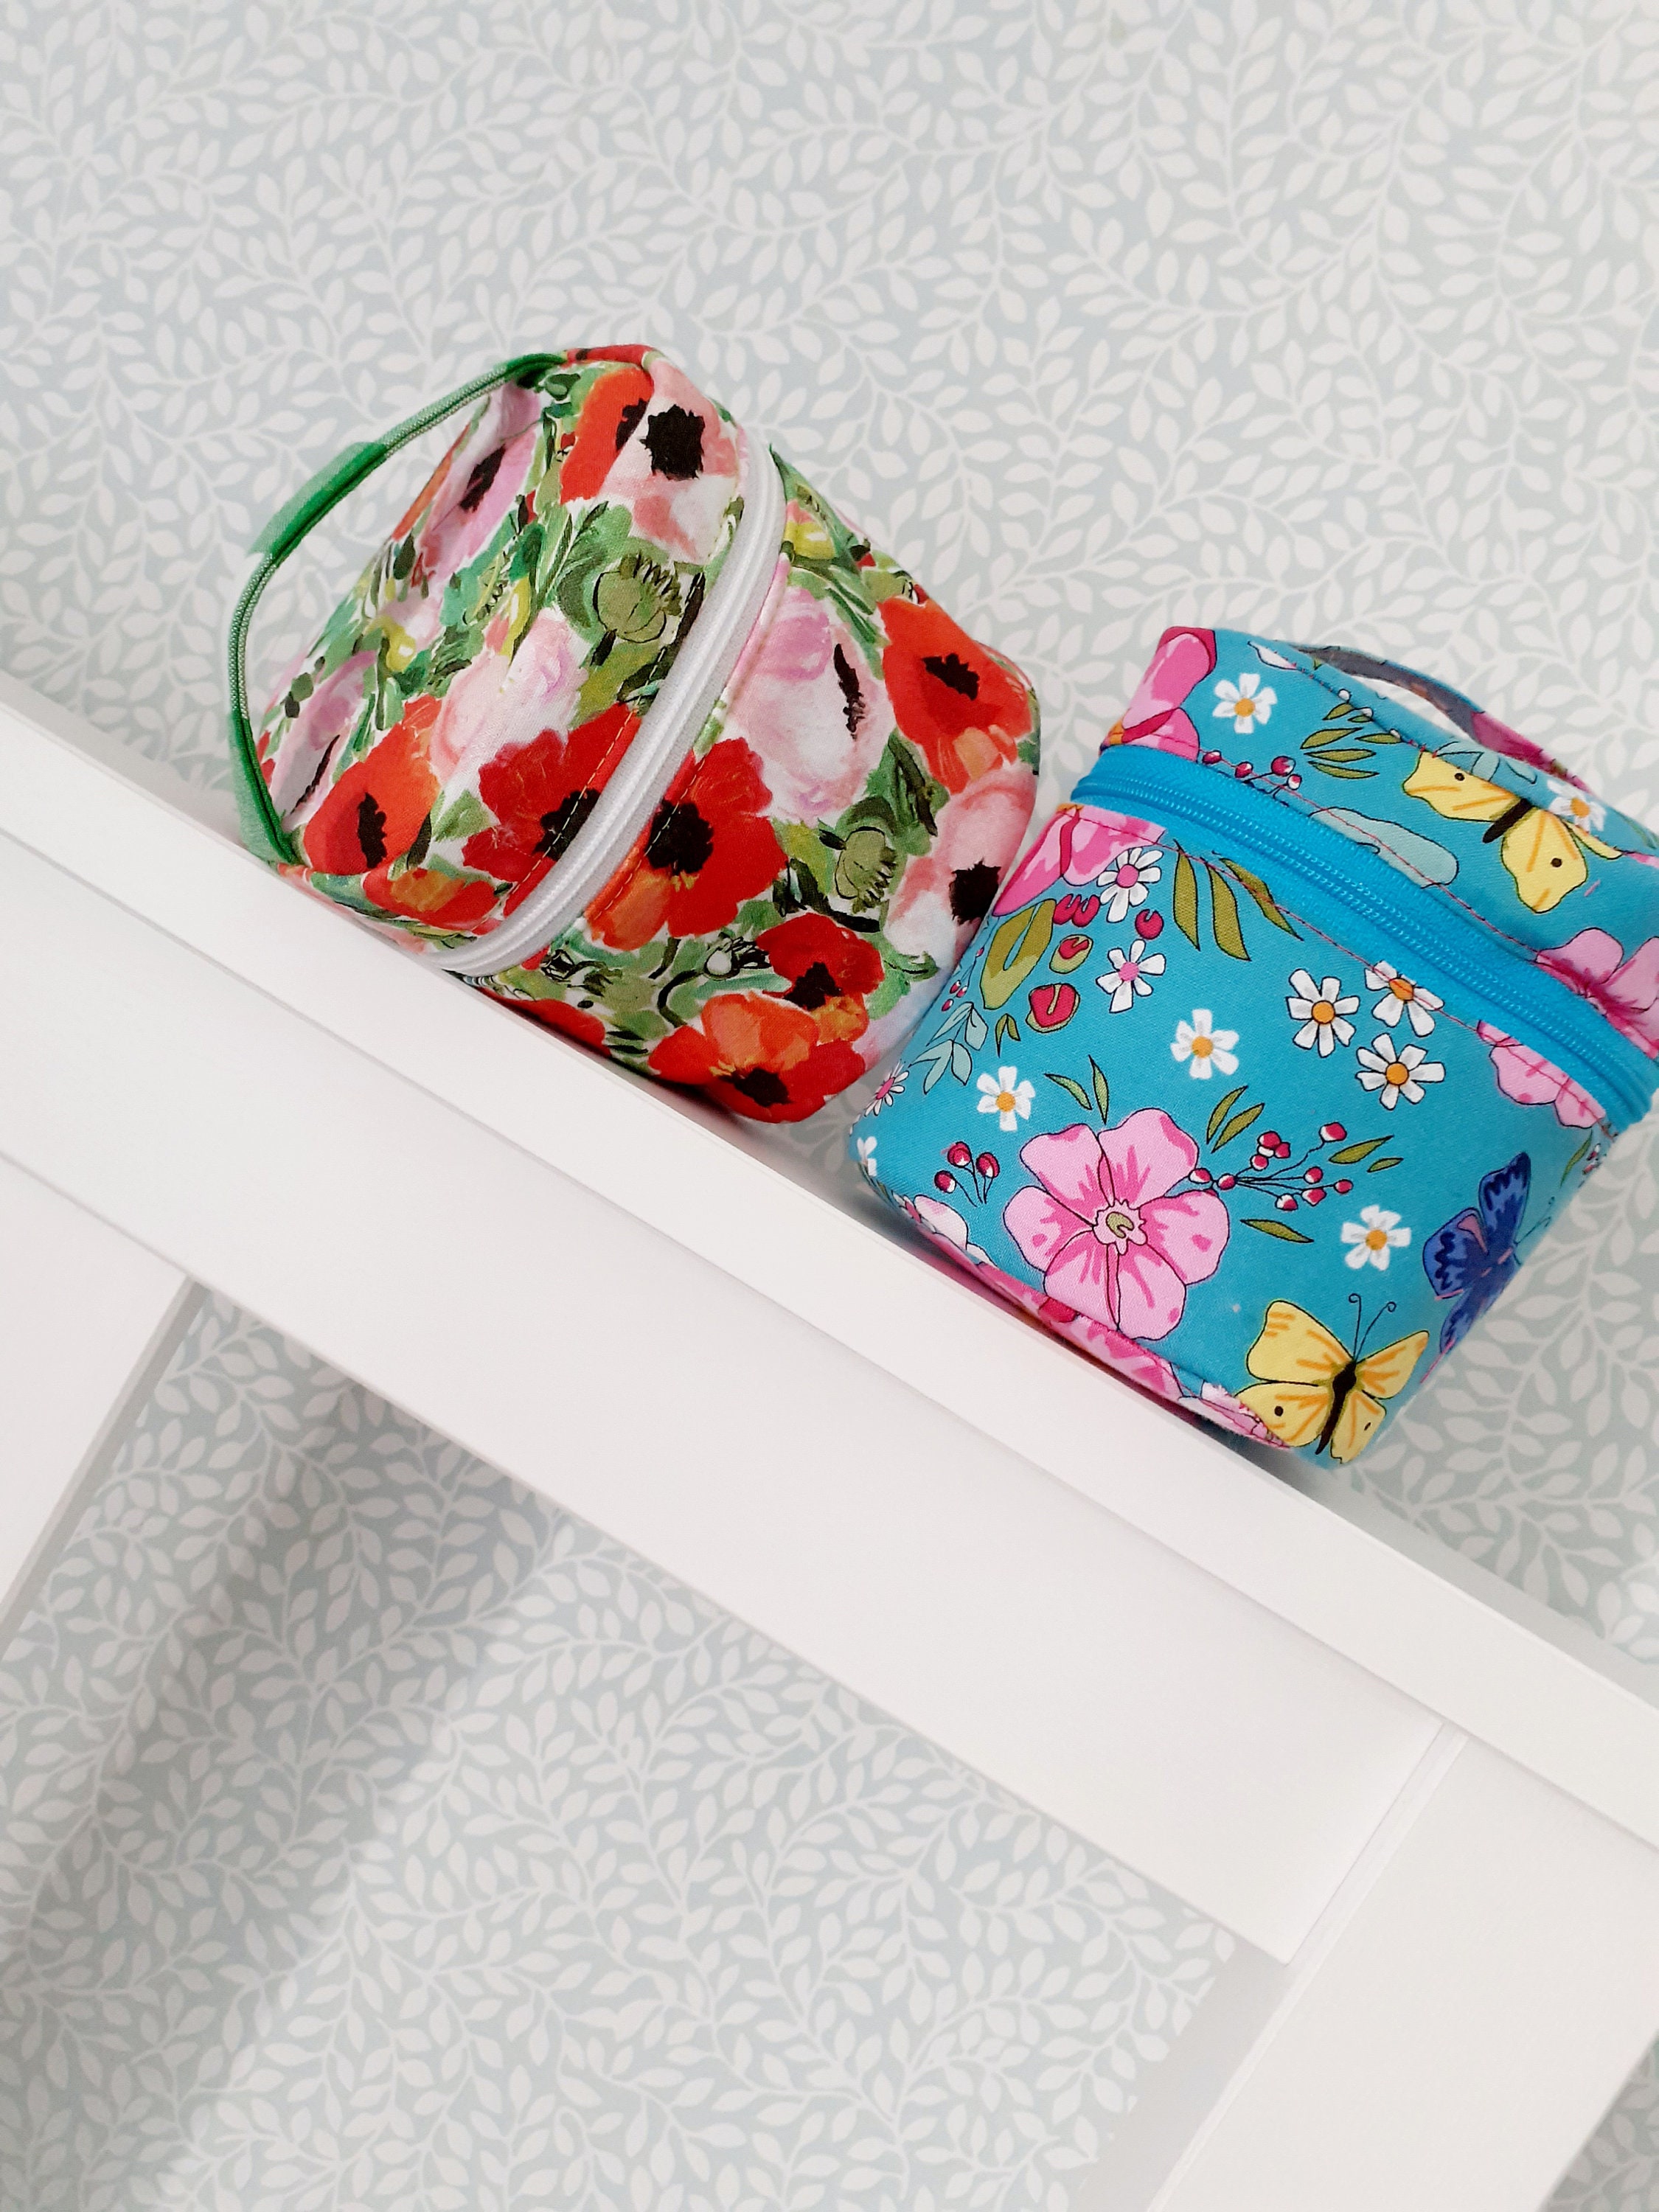 2 Pcs Cute Latch Hook Kits Bag With Printed Pattern Starter Pencil